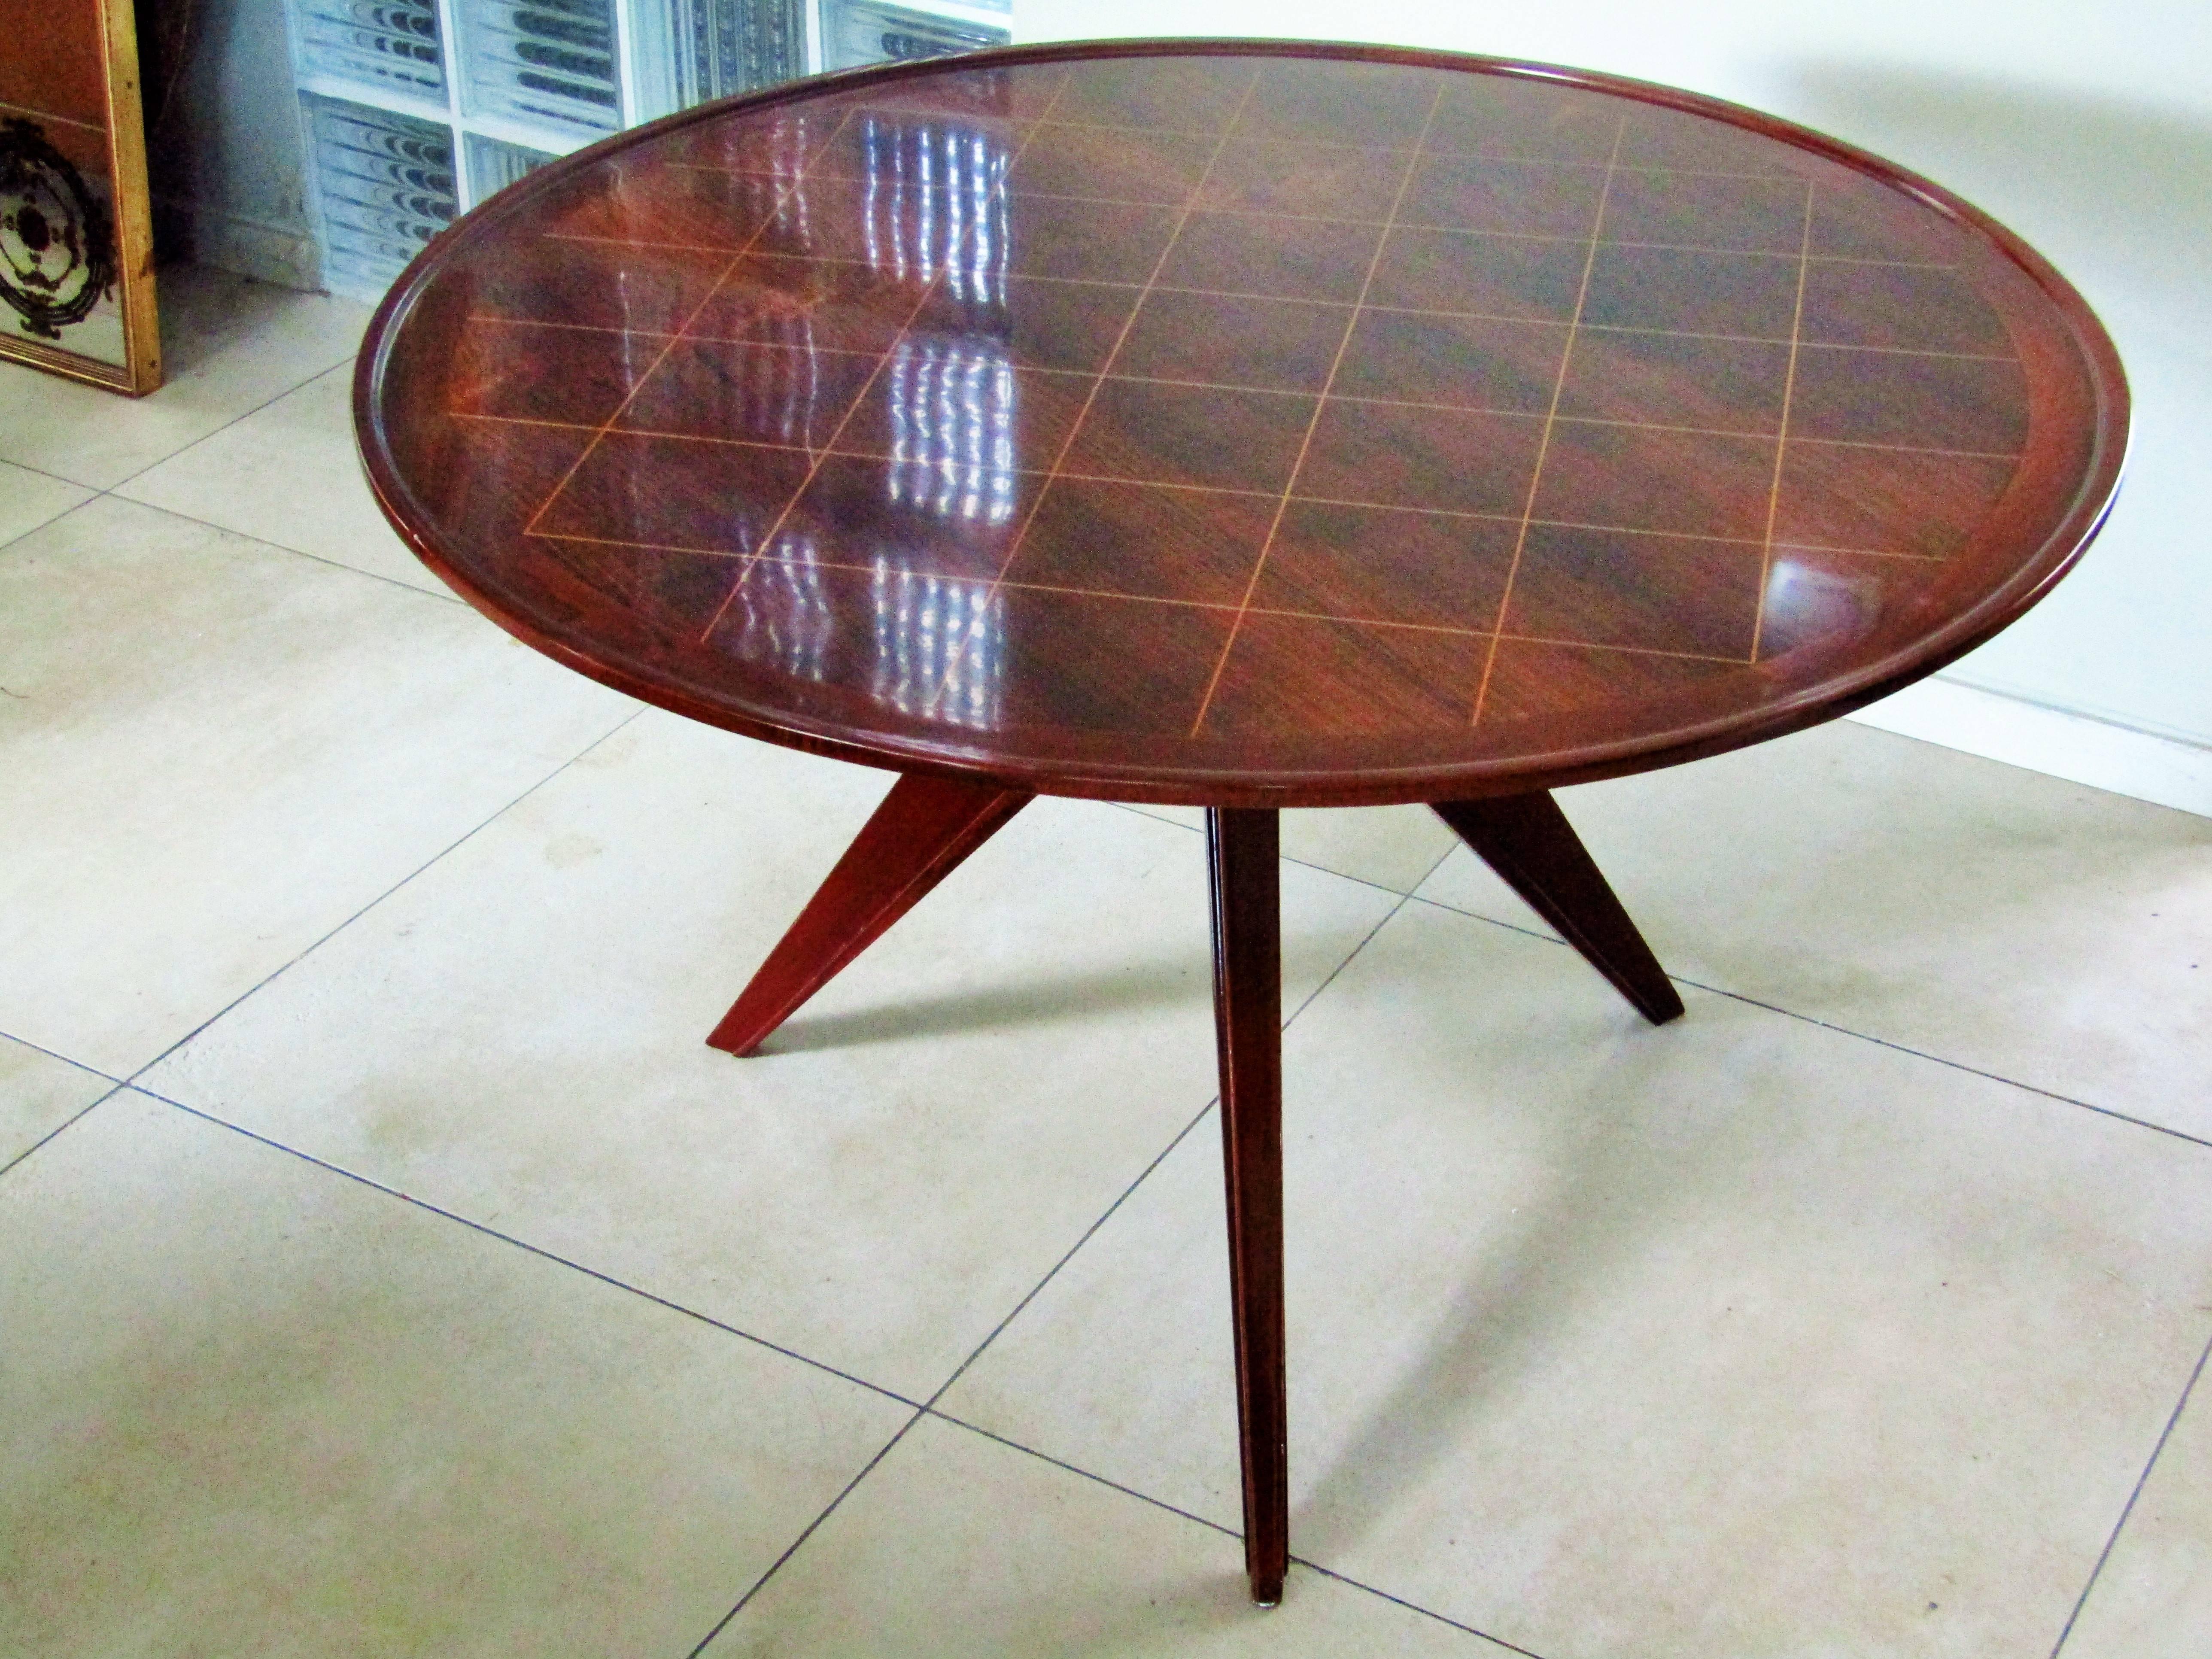 Midcentury Art Deco Rosewood Coffee Table, France, 1940s For Sale 1